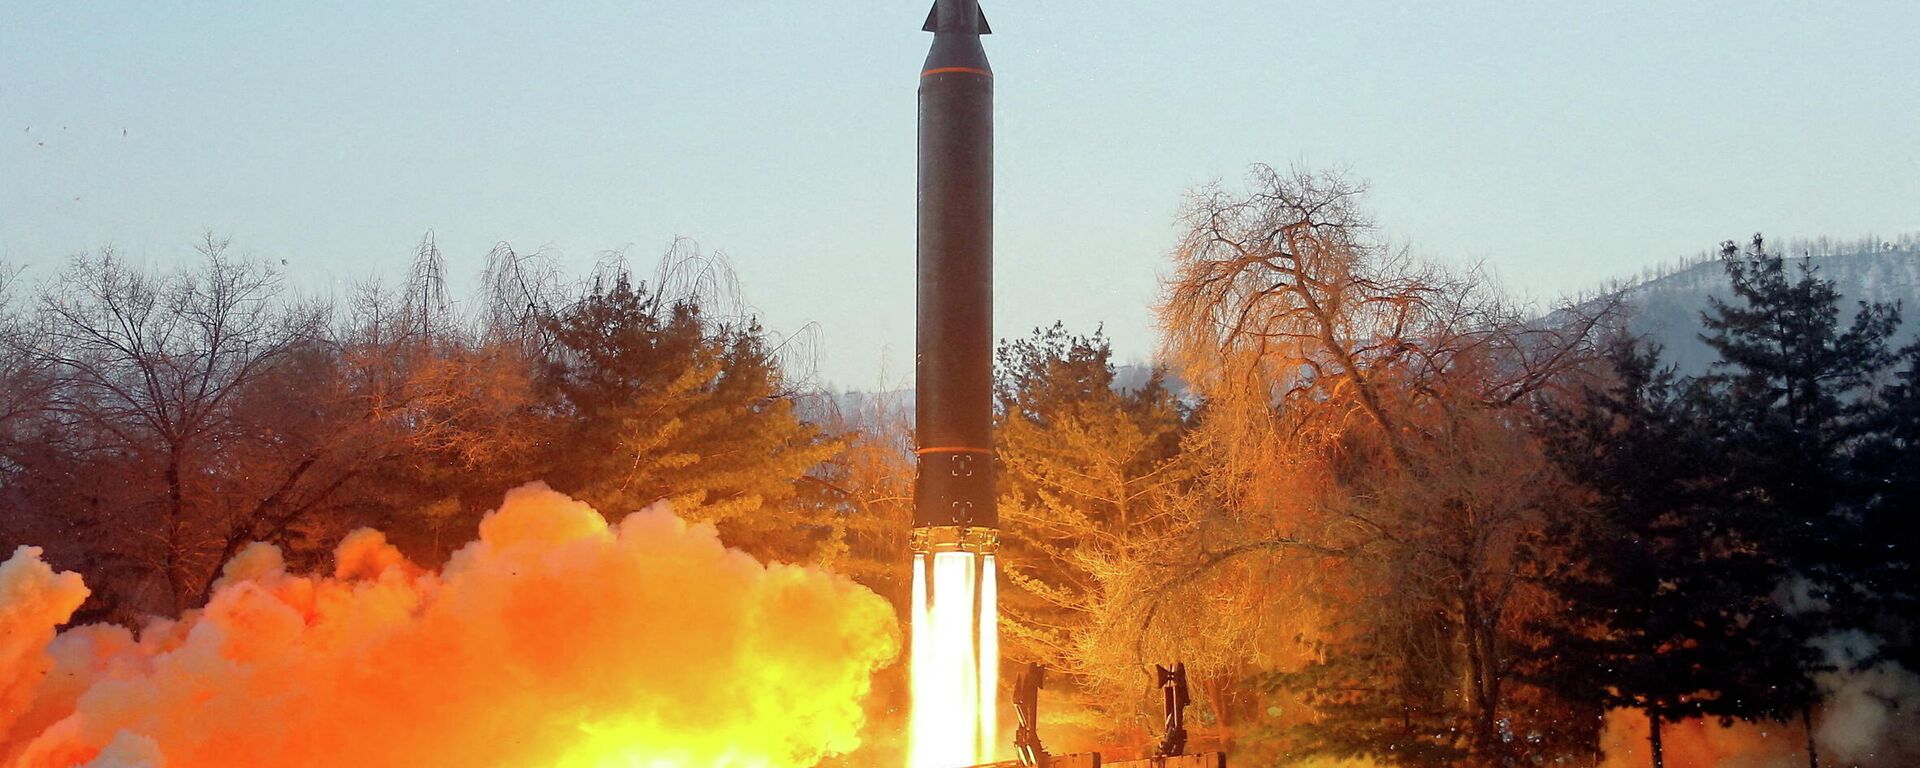  A view of what state news agency KCNA reports is the test firing of a hypersonic missile at an undisclosed location in North Korea, January 5, 2022 - Sputnik International, 1920, 11.01.2022